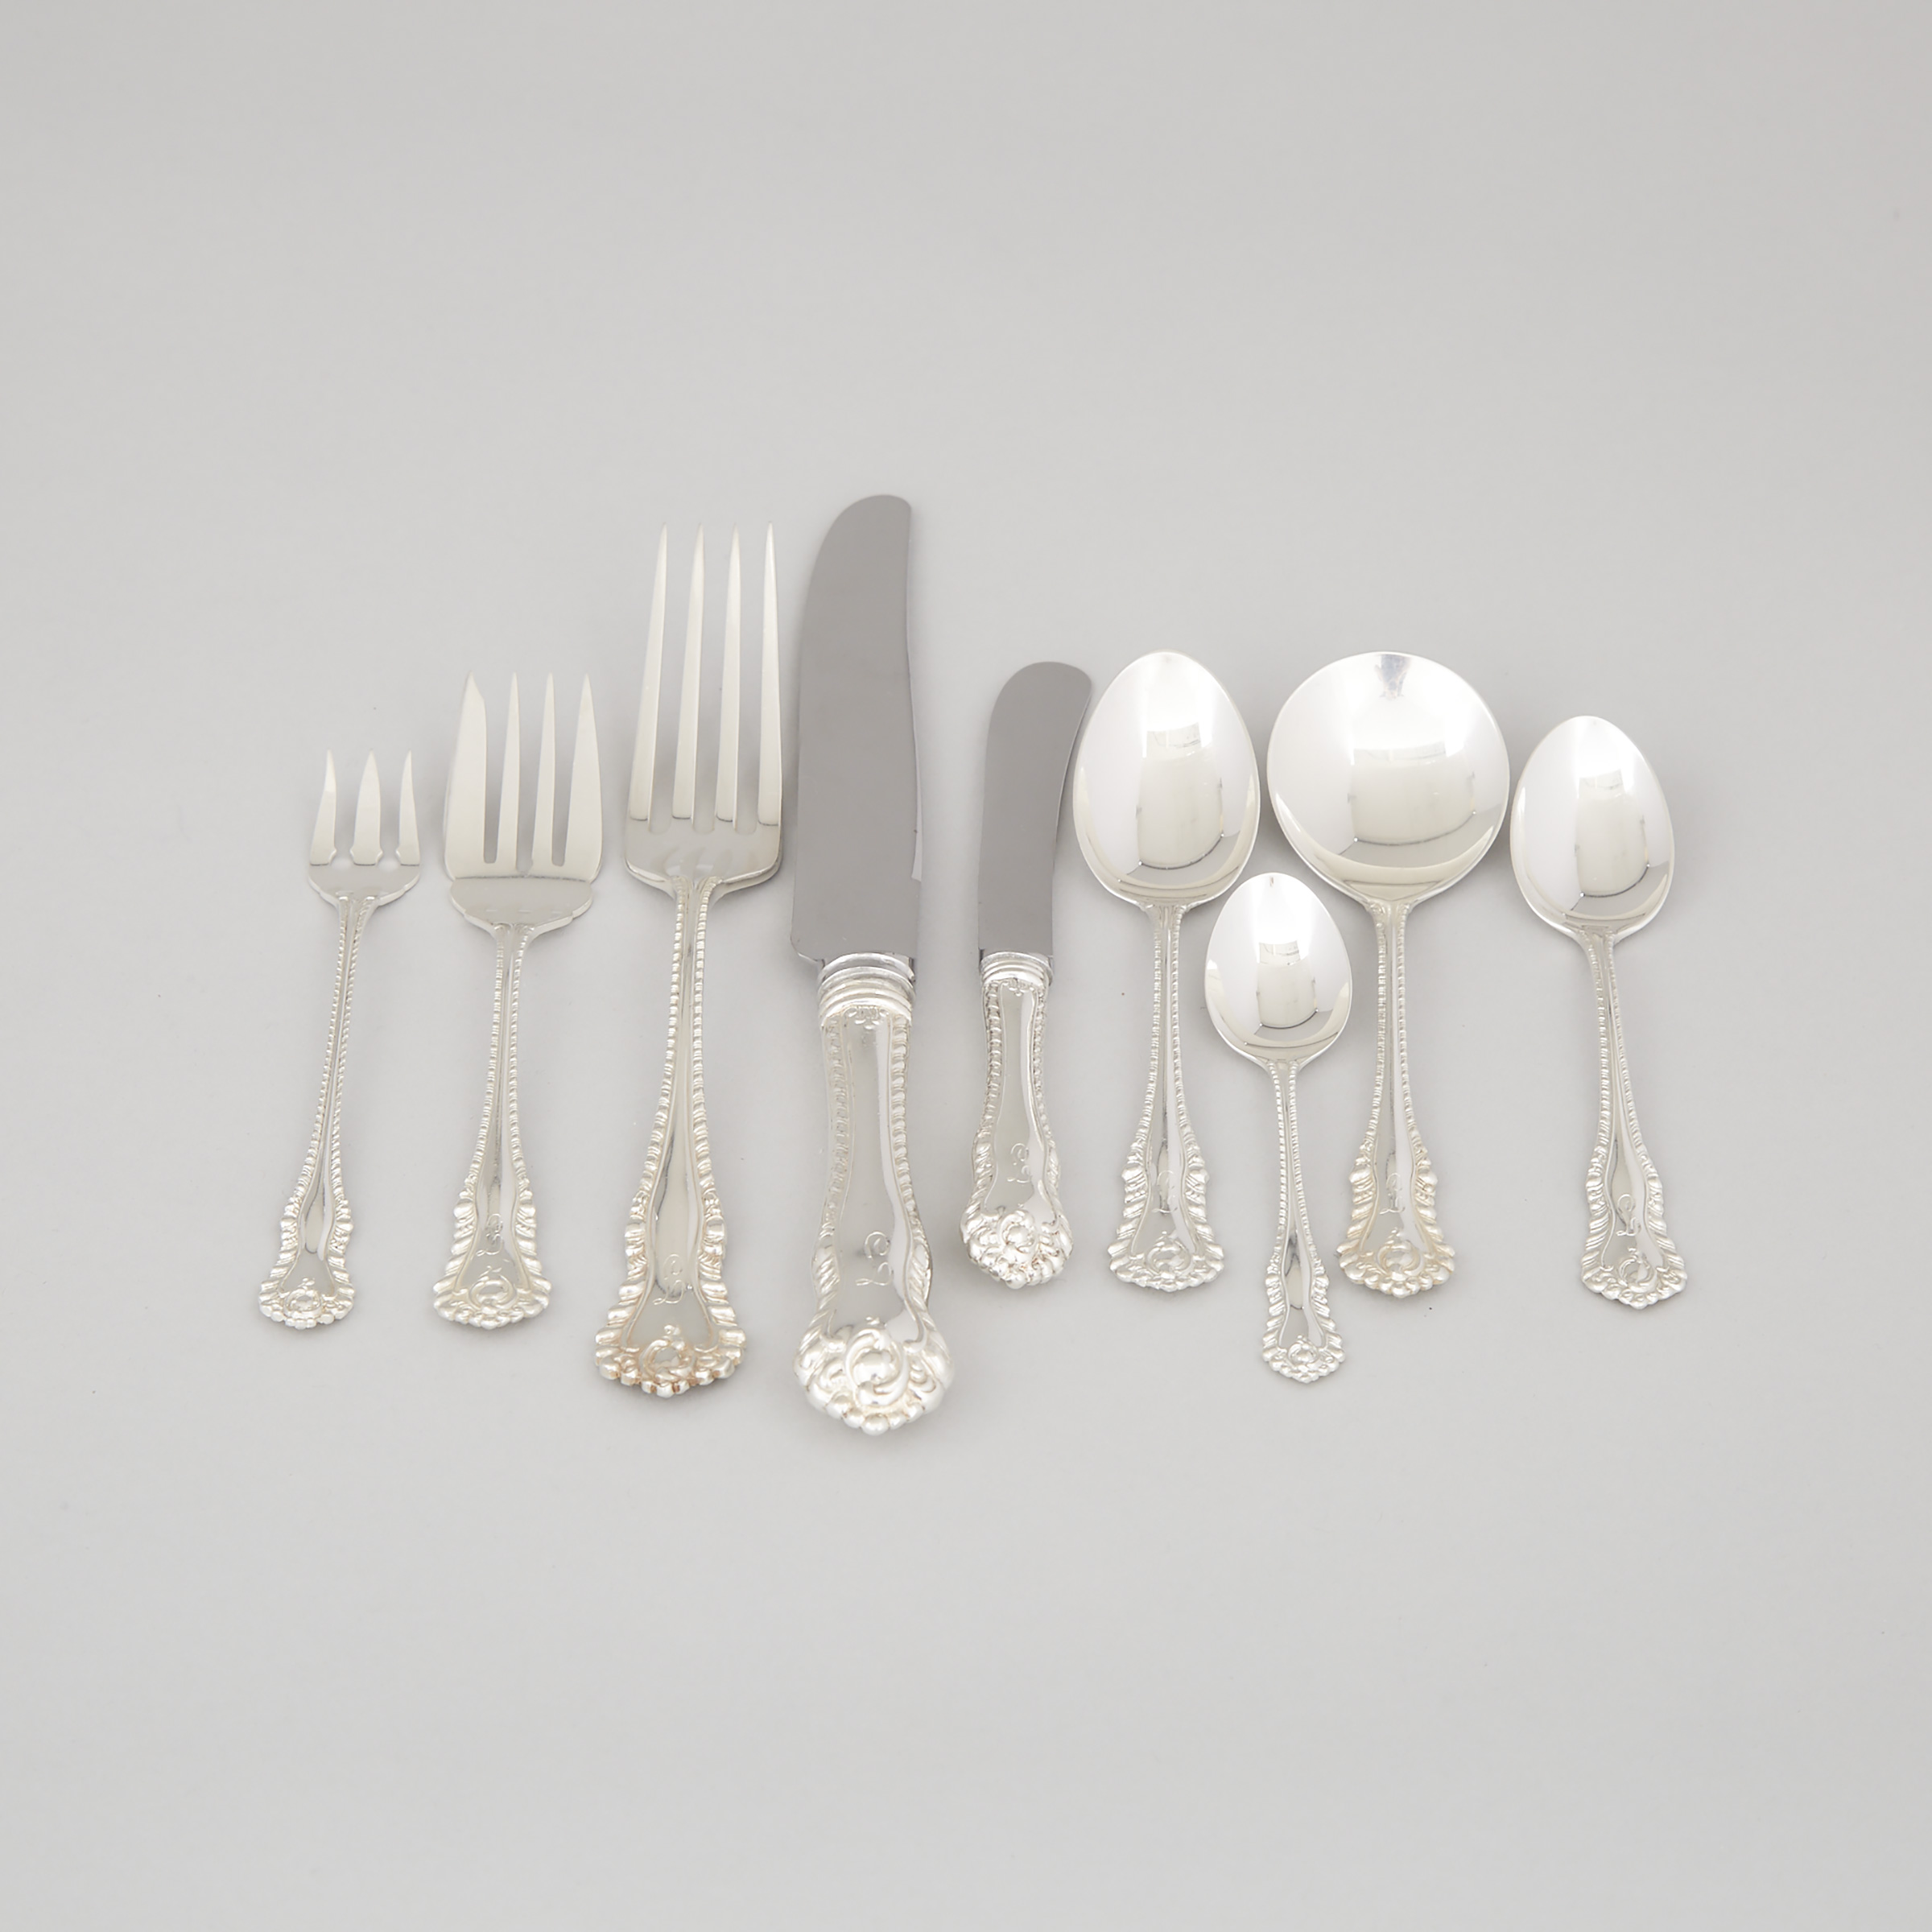 Canadian Silver ‘Gadroon’ Pattern Flatware Service, Henry Birks & Sons, Montreal, Que., 20th century